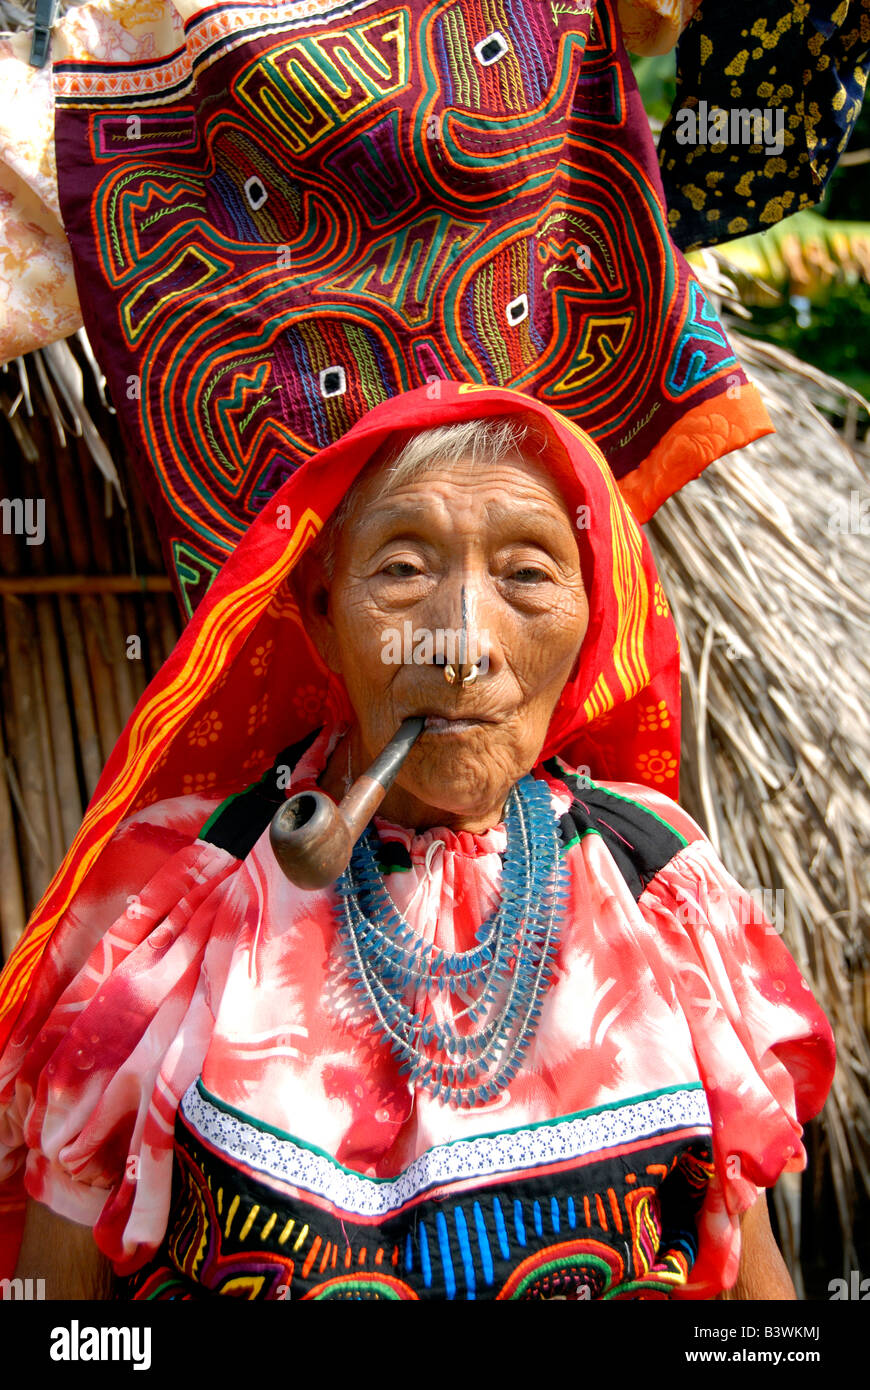 Central America, Panama, San Blas Islands. Kuna Indian woman in traditional attire in front of colorful hand stitched molas. Stock Photo